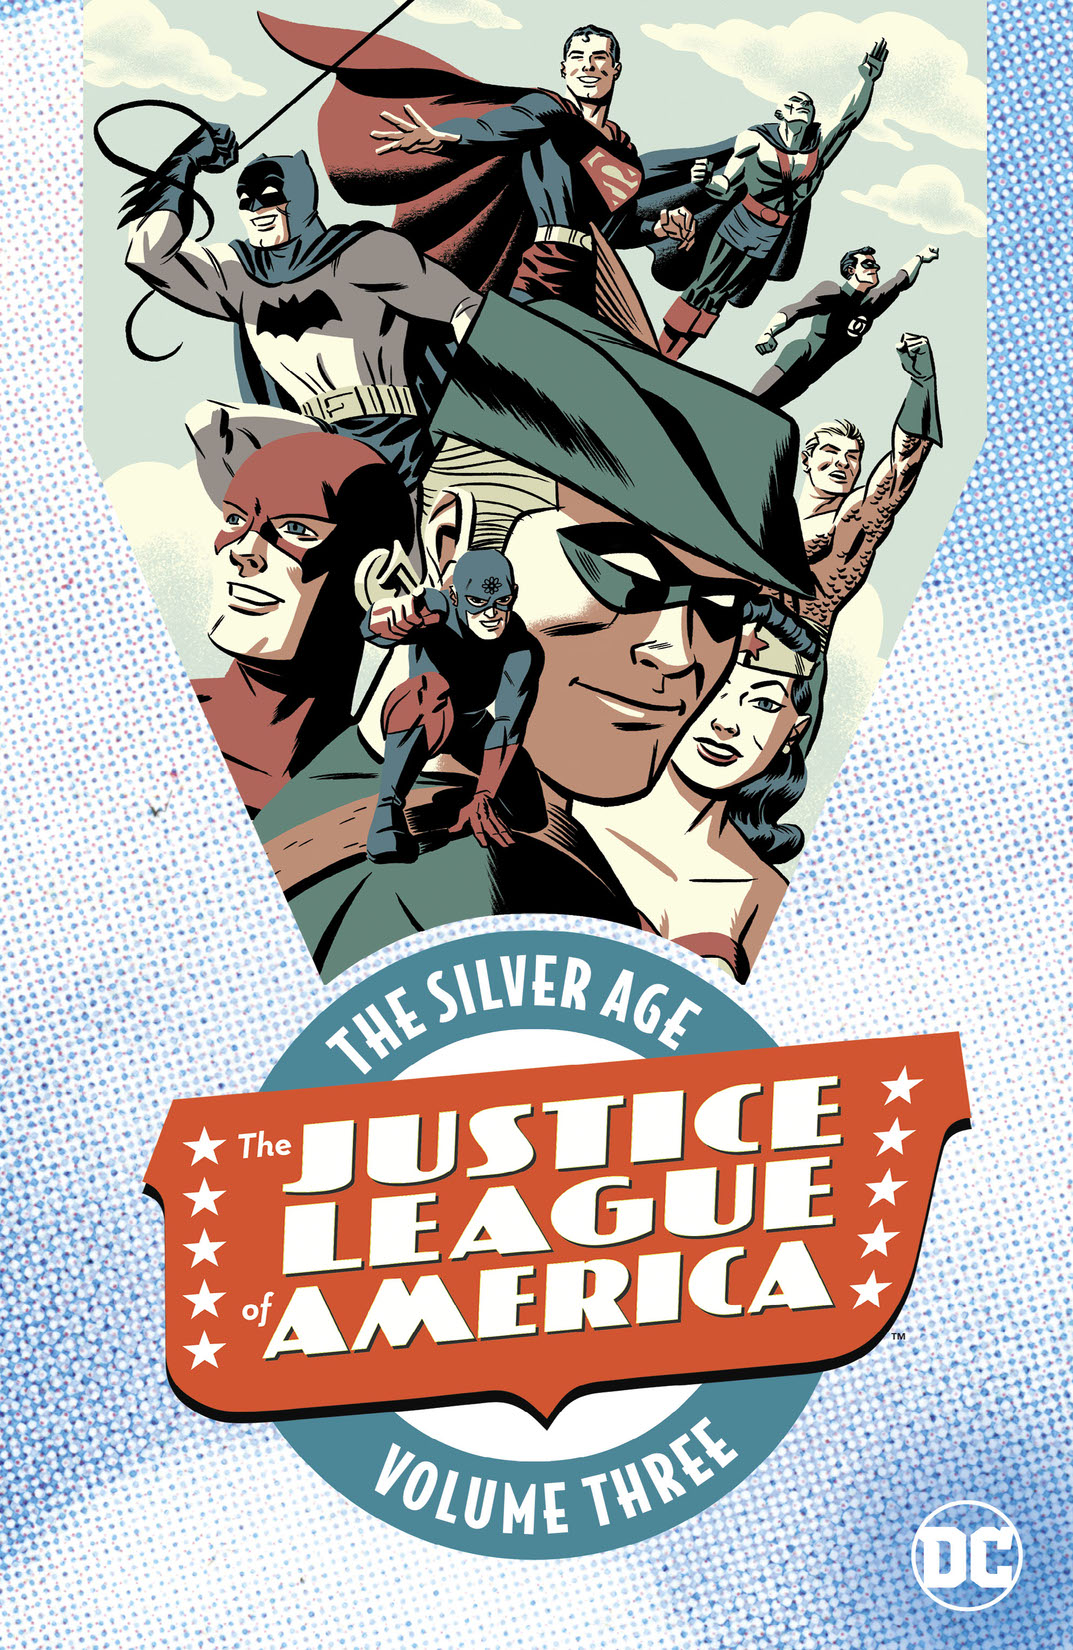 Justice League of America: The Silver Age Vol. 3 preview images